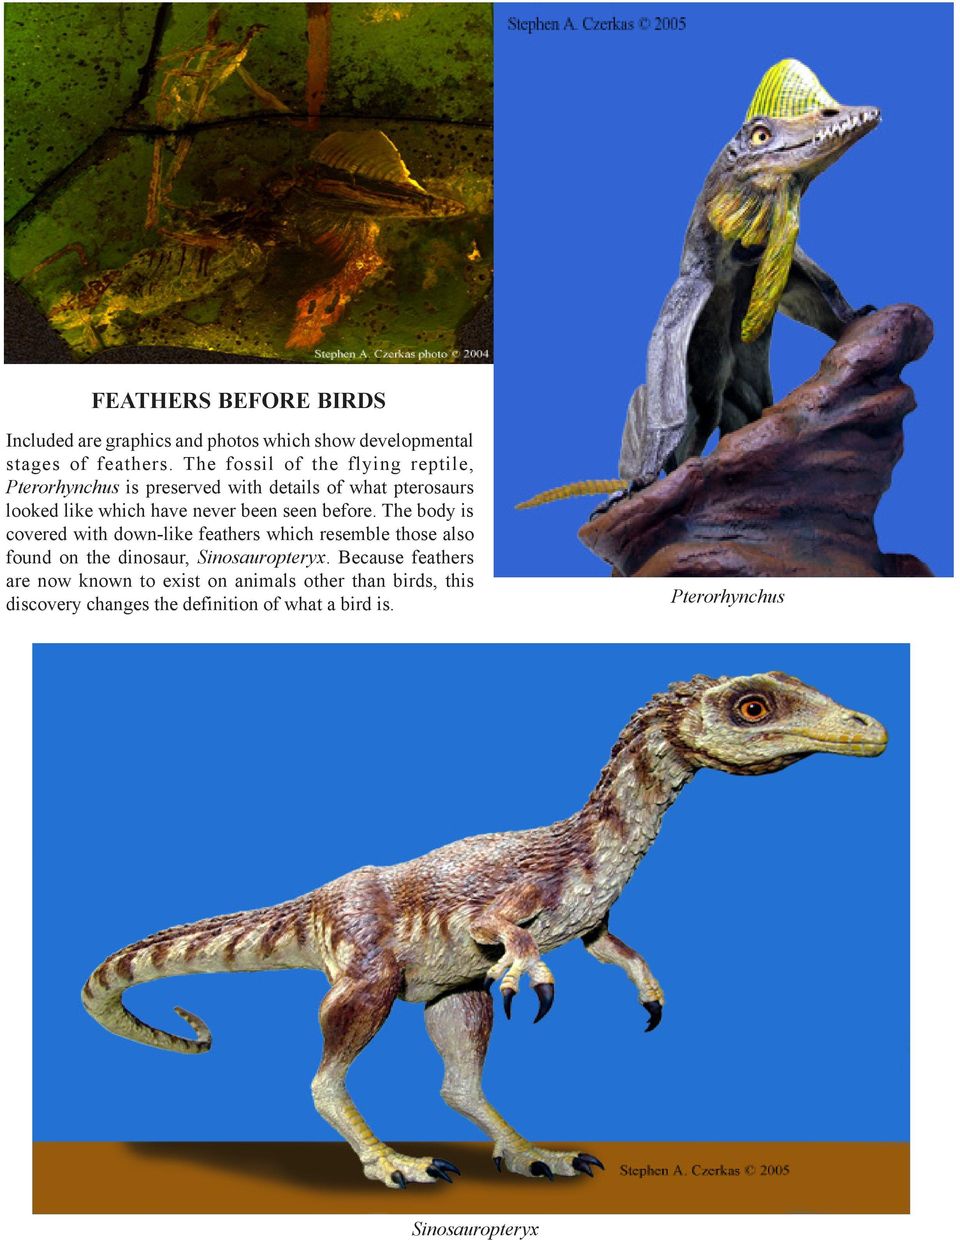 seen before. The body is covered with down-like feathers which resemble those also found on the dinosaur, Sinosauropteryx.